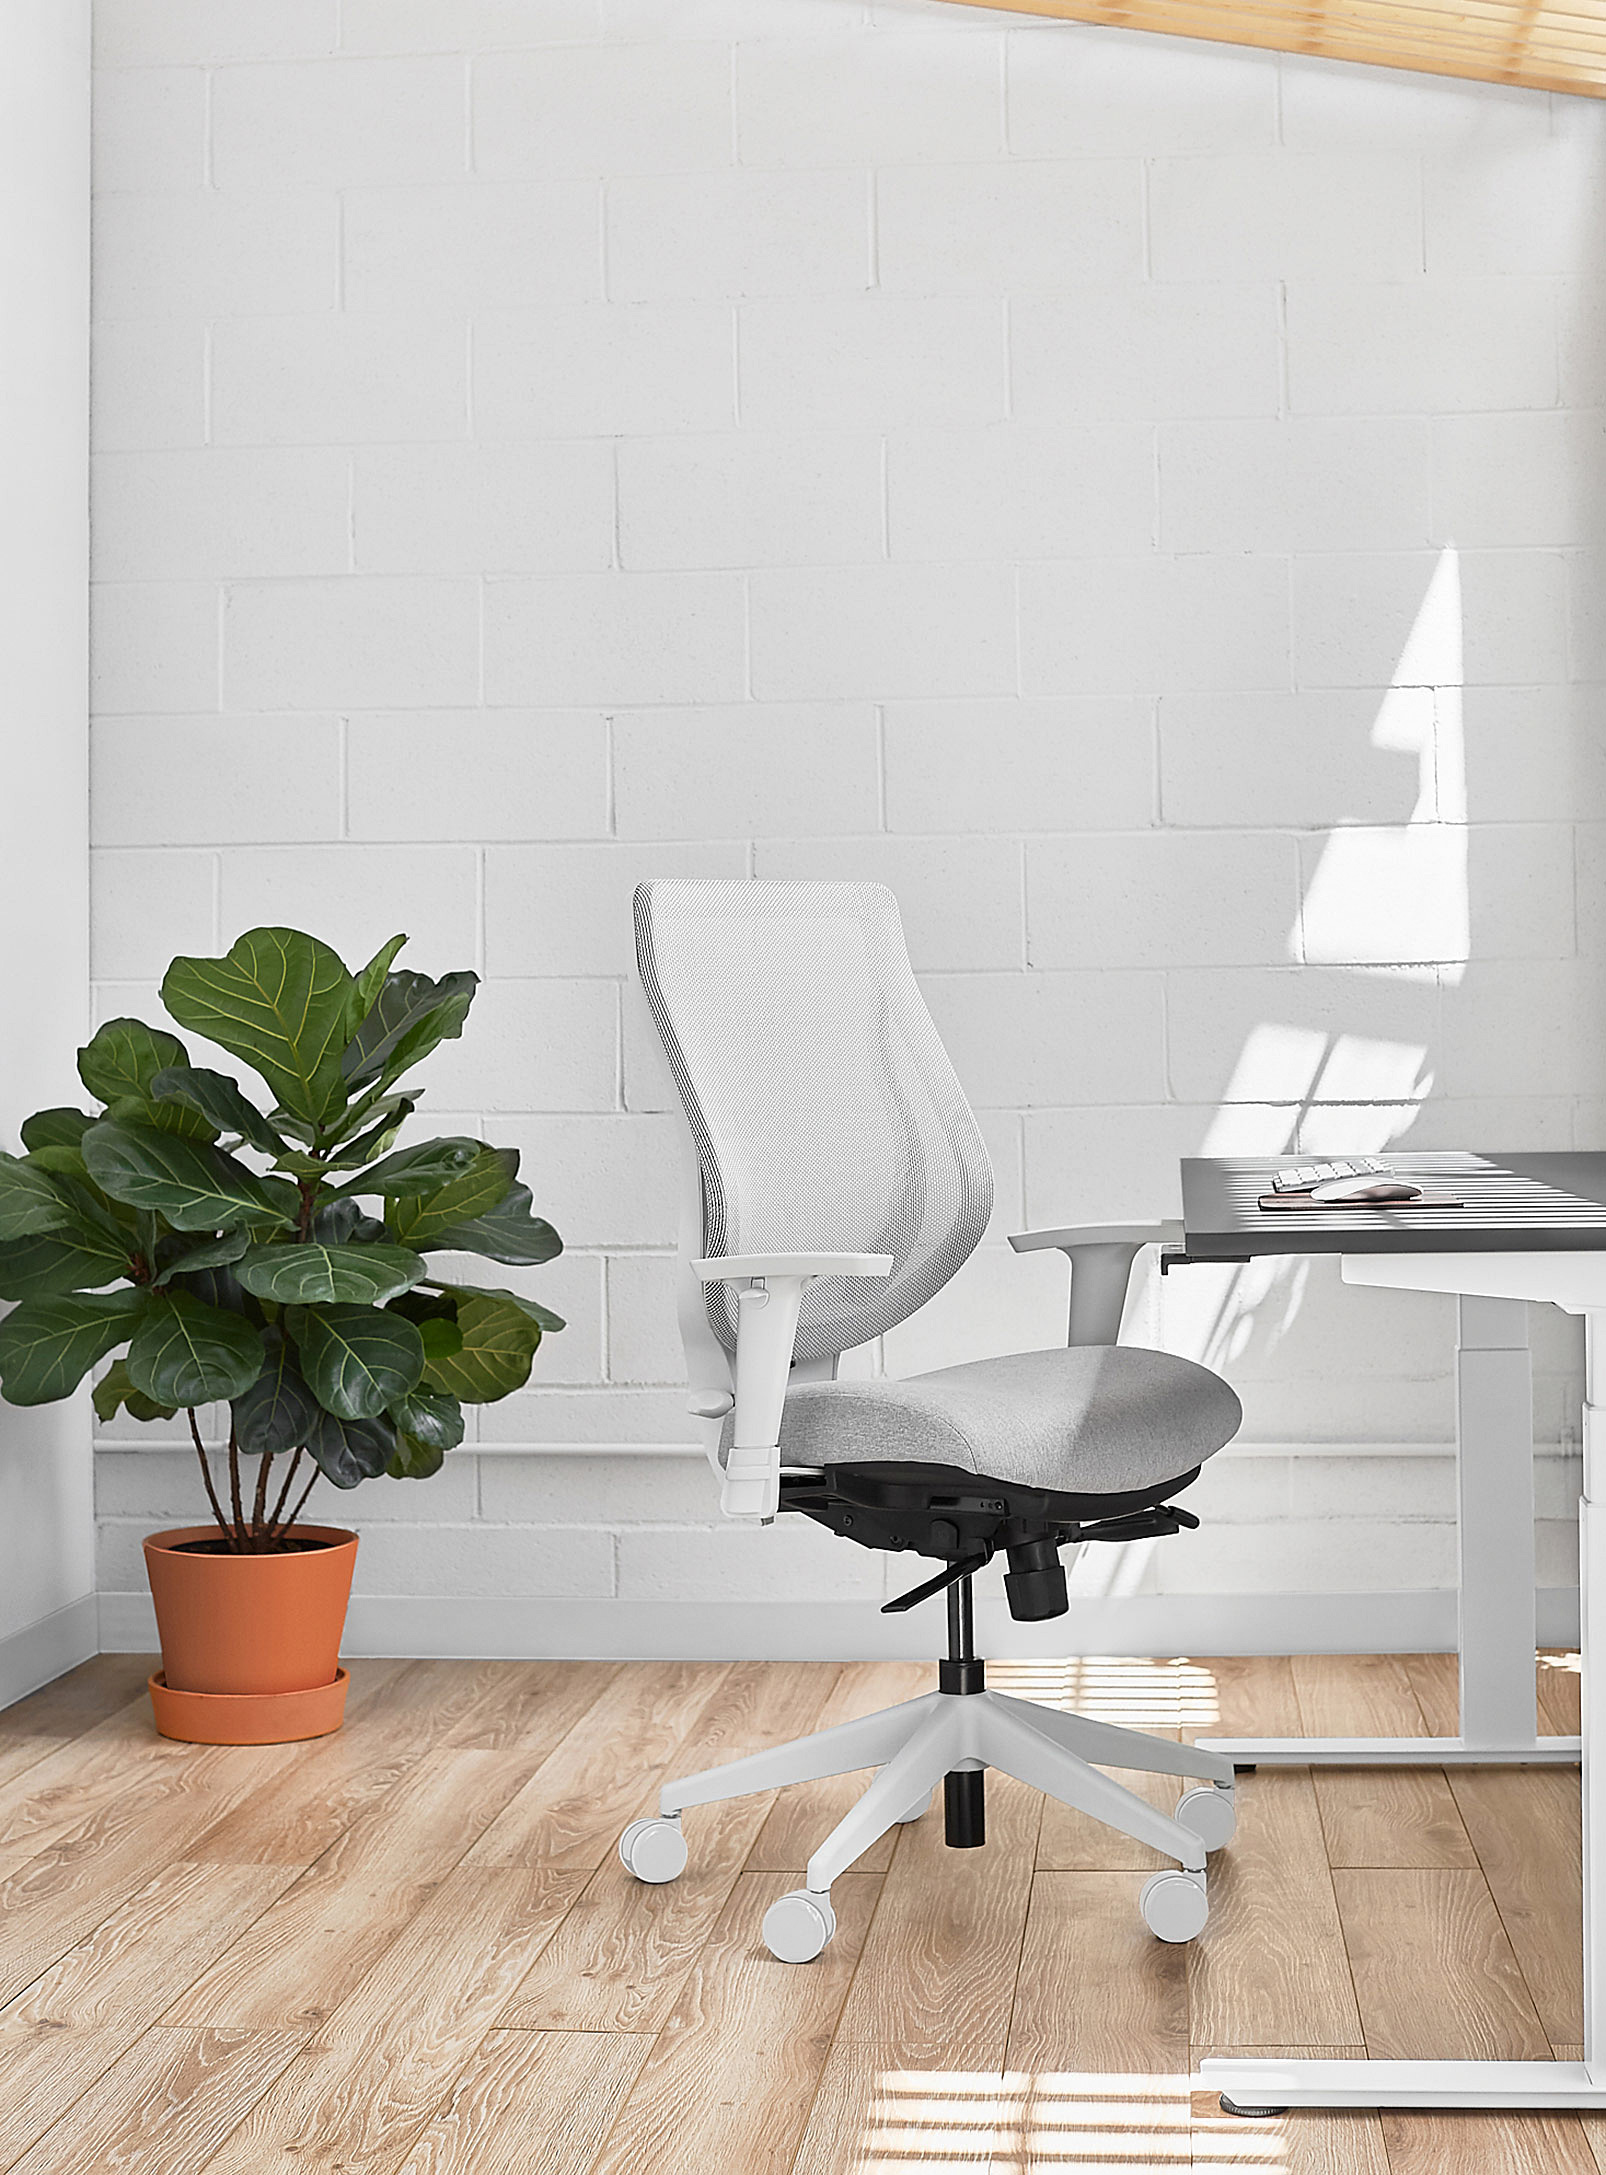 Ergonofis Youtoo Ergonomic Chair With Fabric Seat White Base In Light Grey